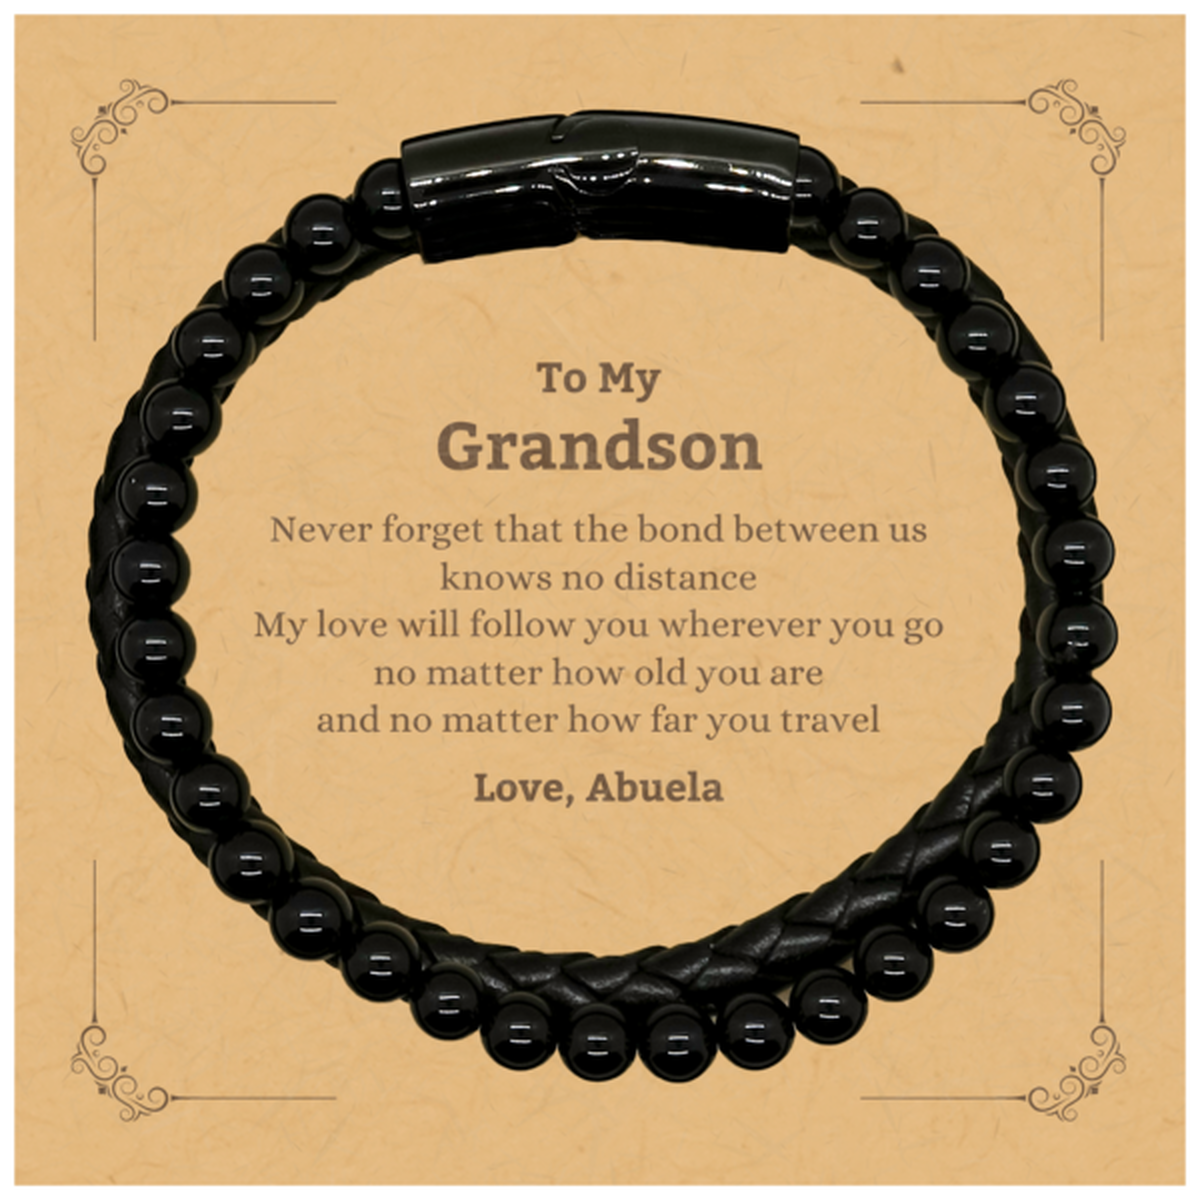 Grandson Birthday Gifts from Abuela, Adjustable Stone Leather Bracelets for Grandson Christmas Graduation Unique Gifts Grandson Never forget that the bond between us knows no distance. Love, Abuela